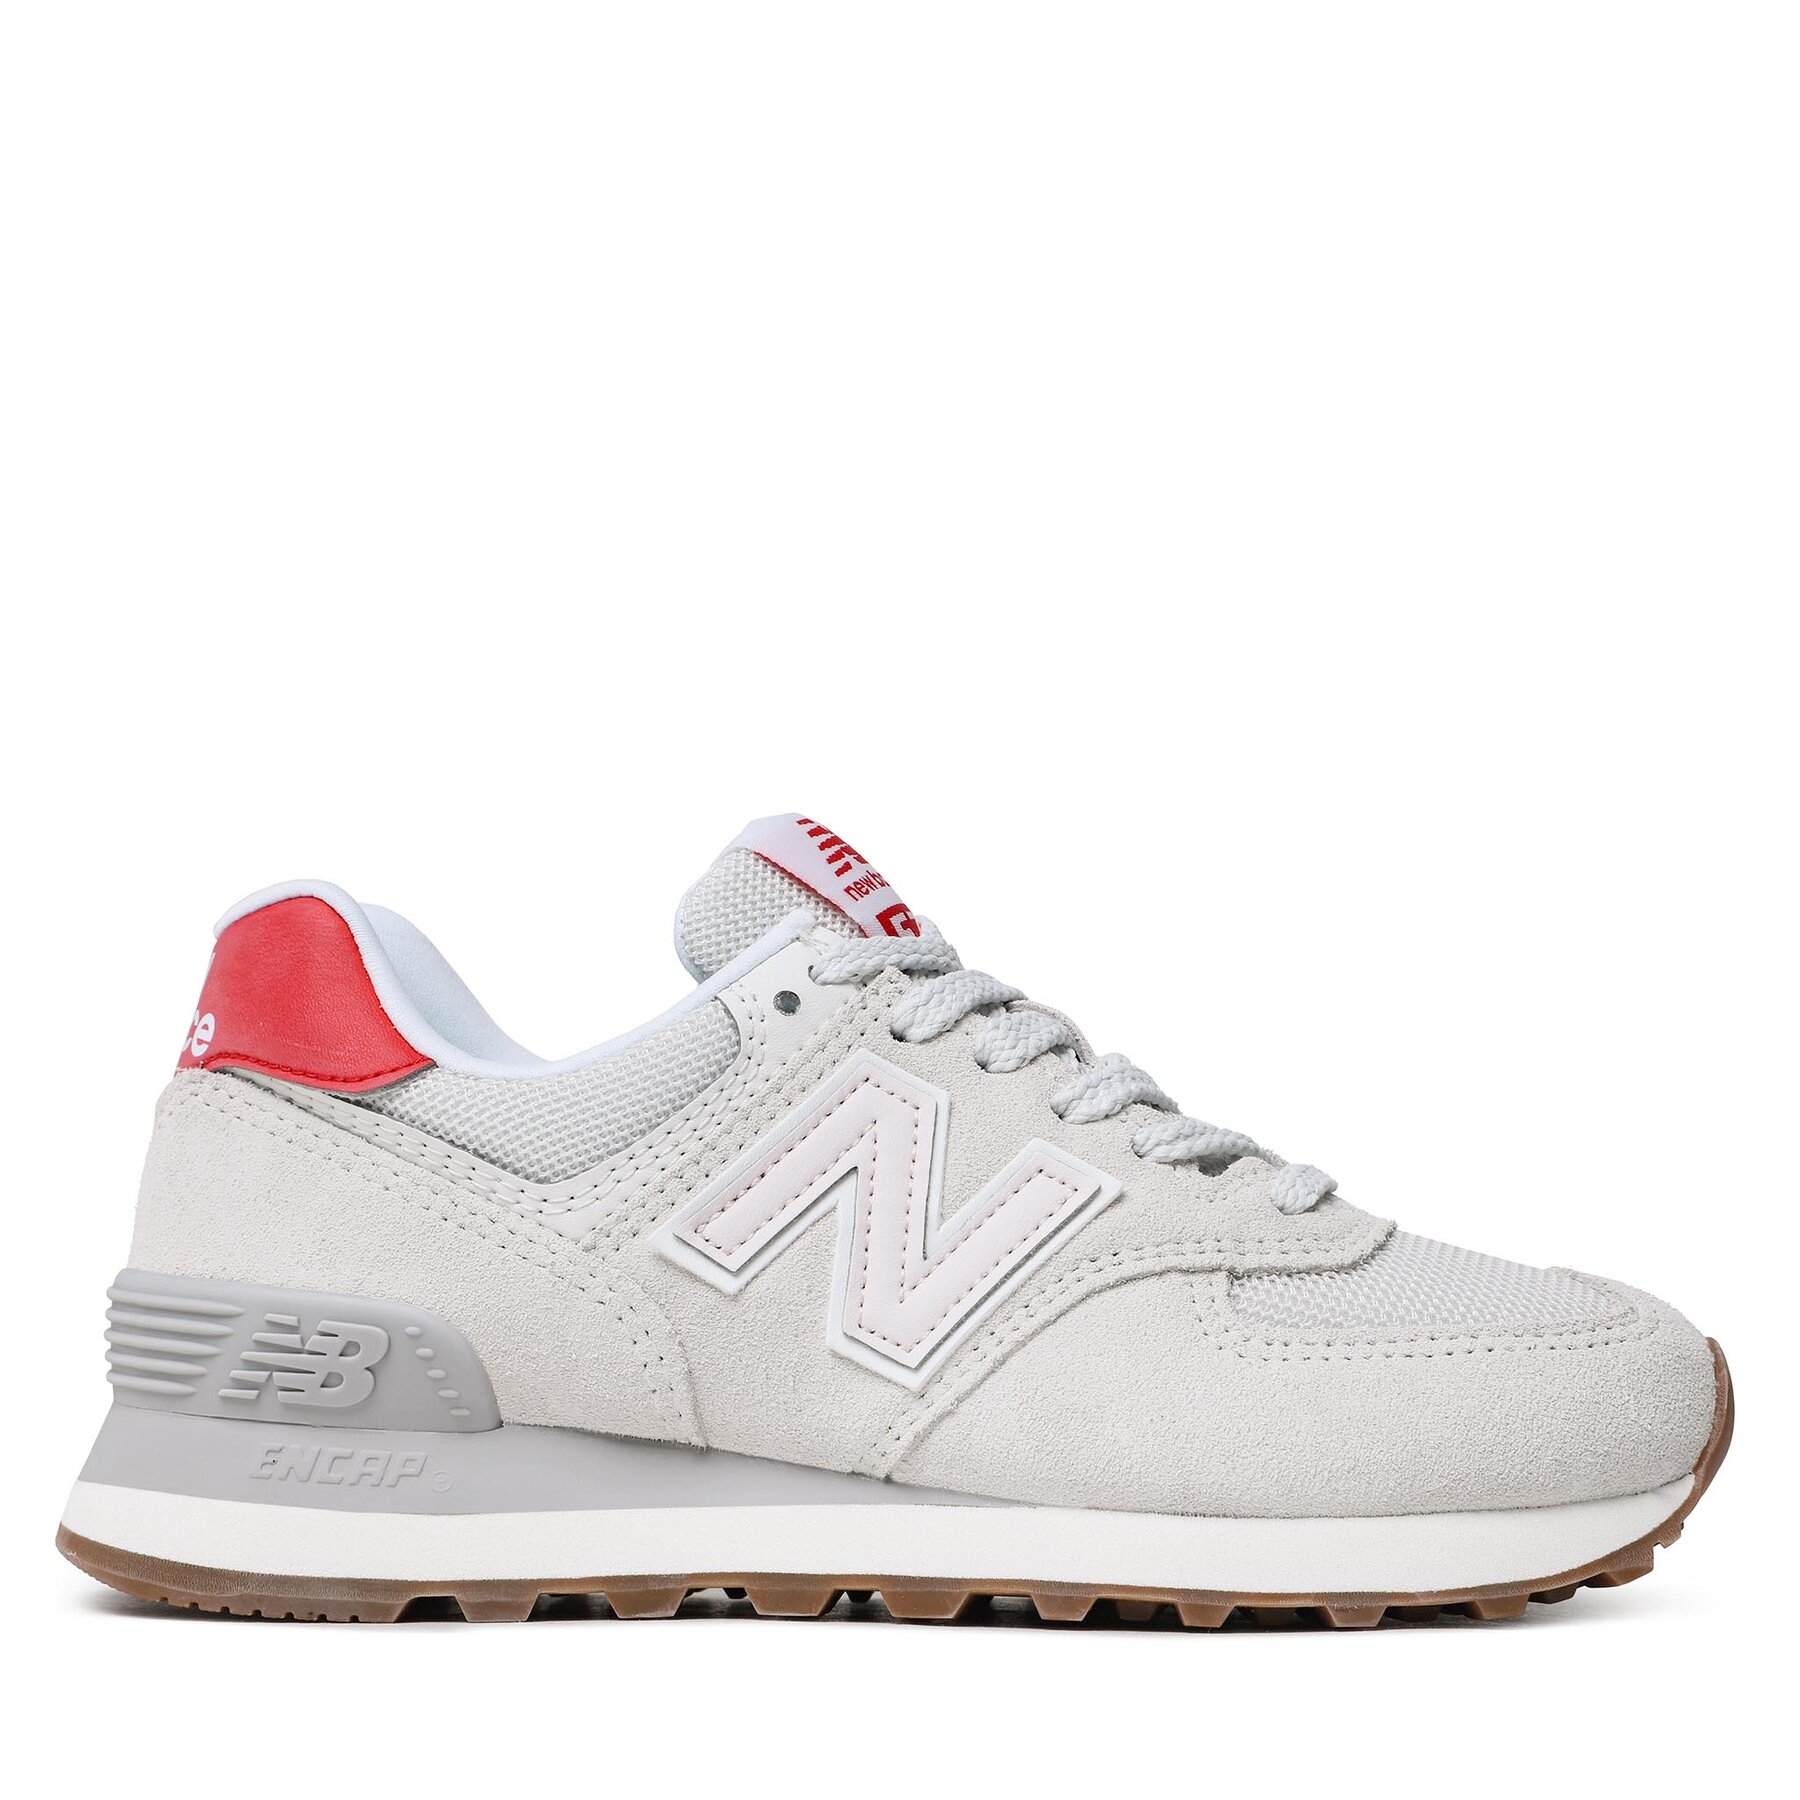 New Balance 574 Women reflection/washed pink/true red